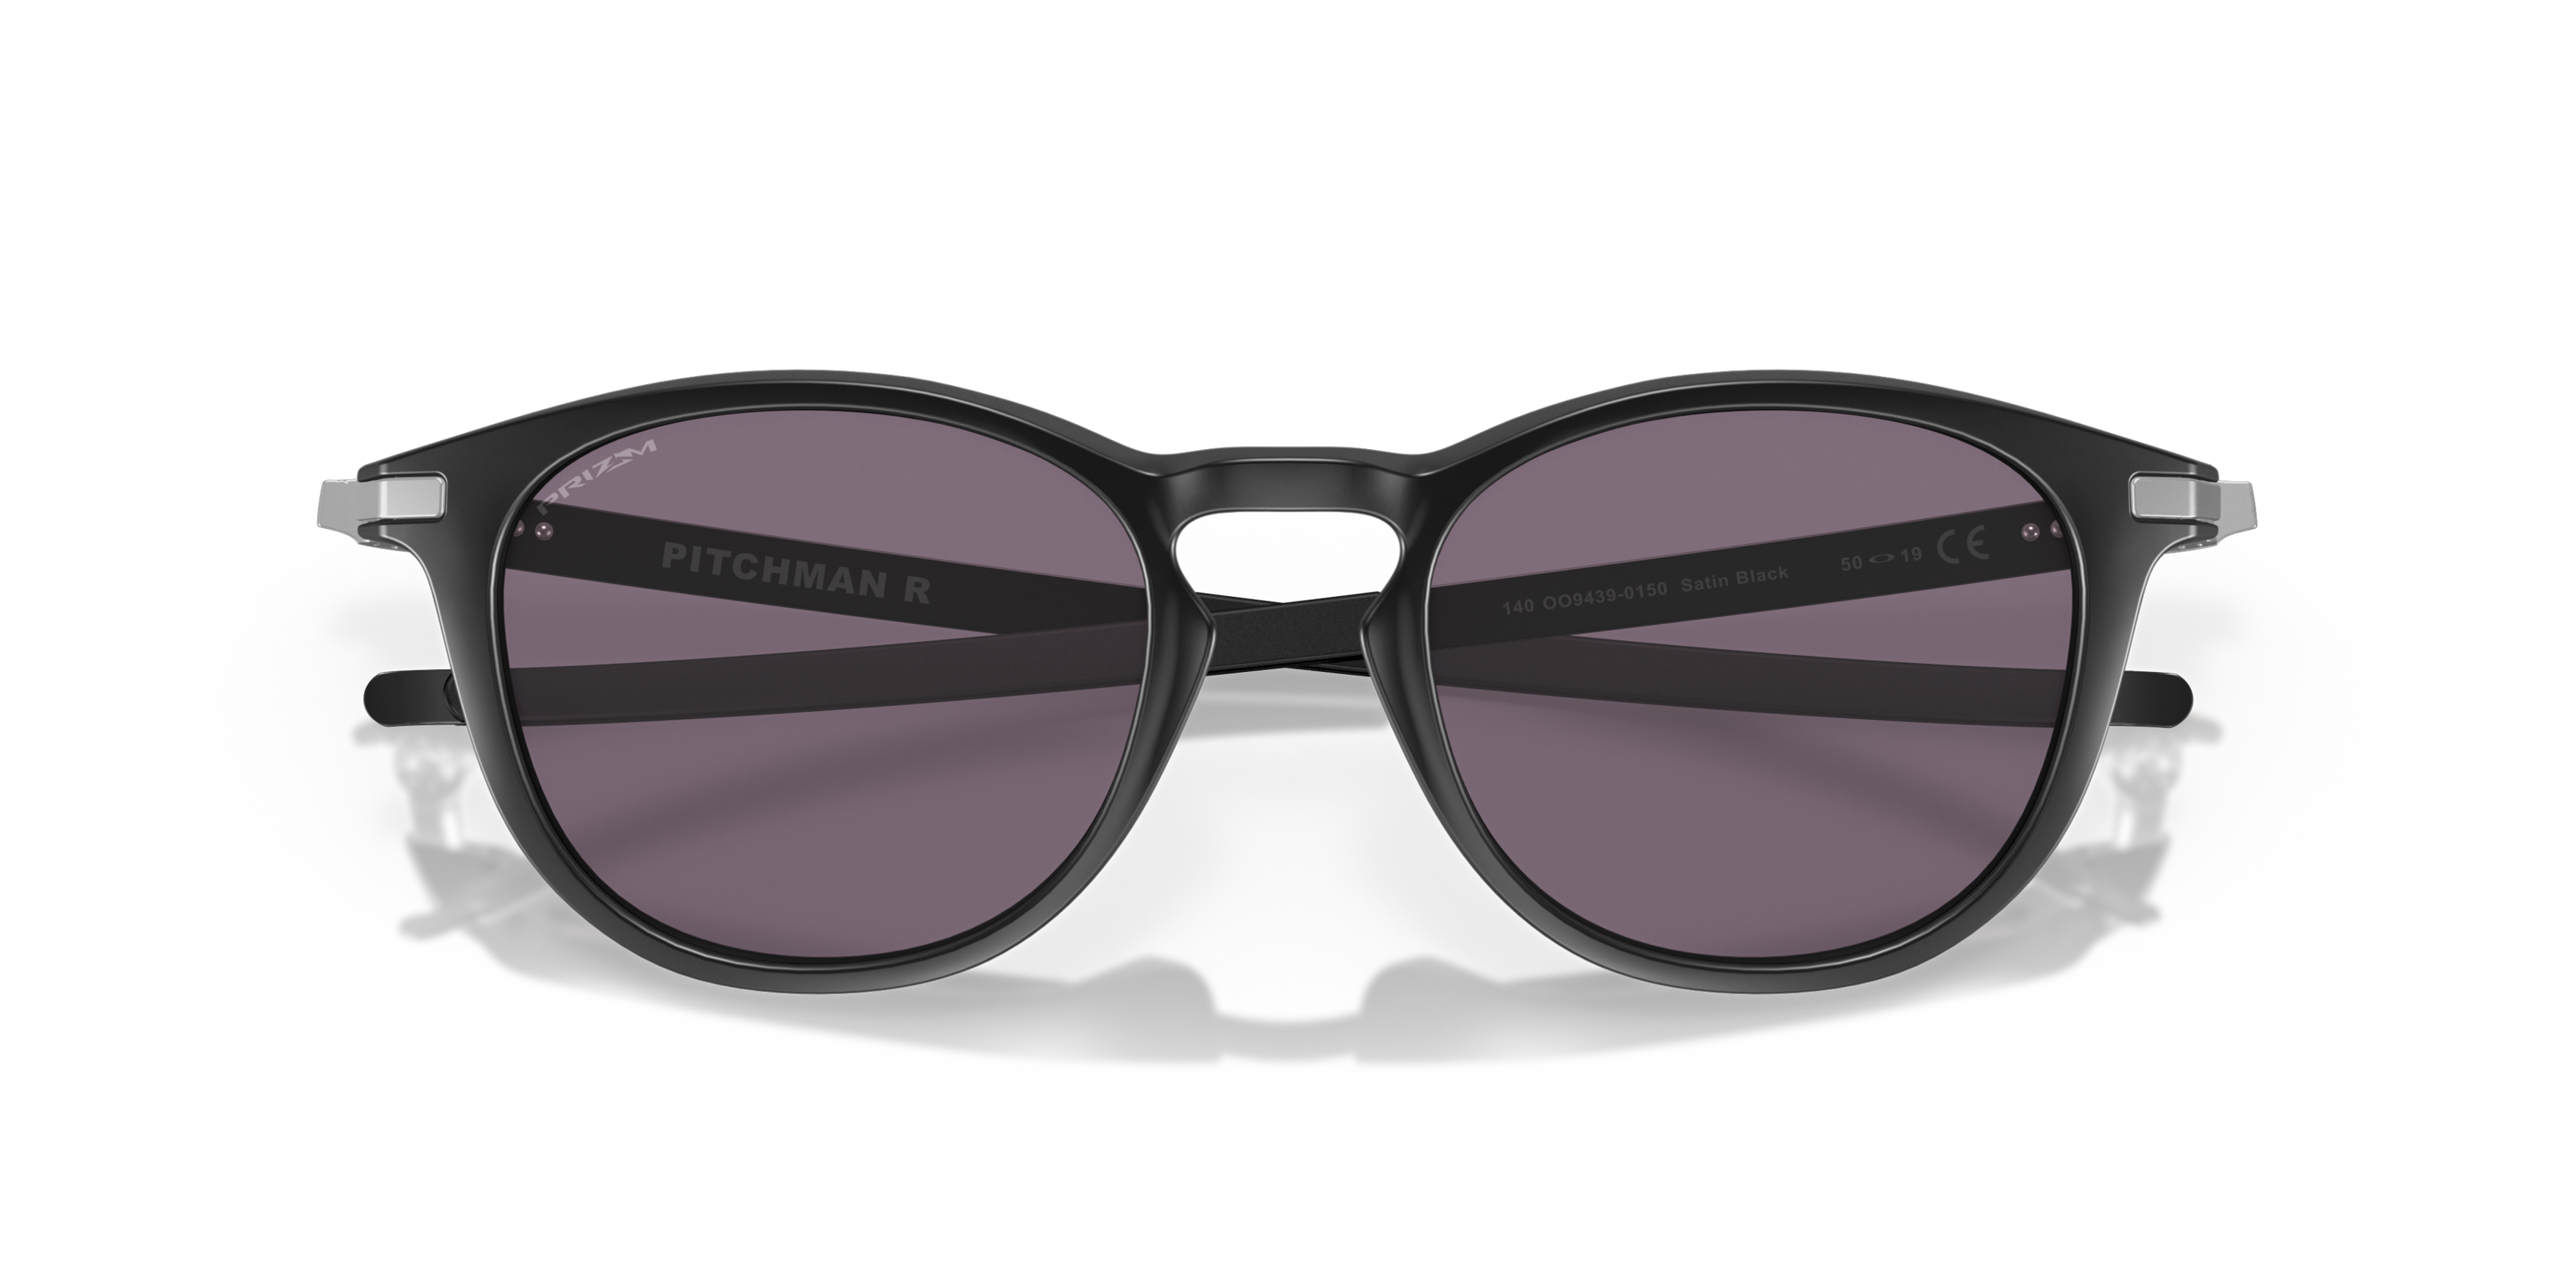 [products.image.folded] Oakley Pitchman R OO9439 0150